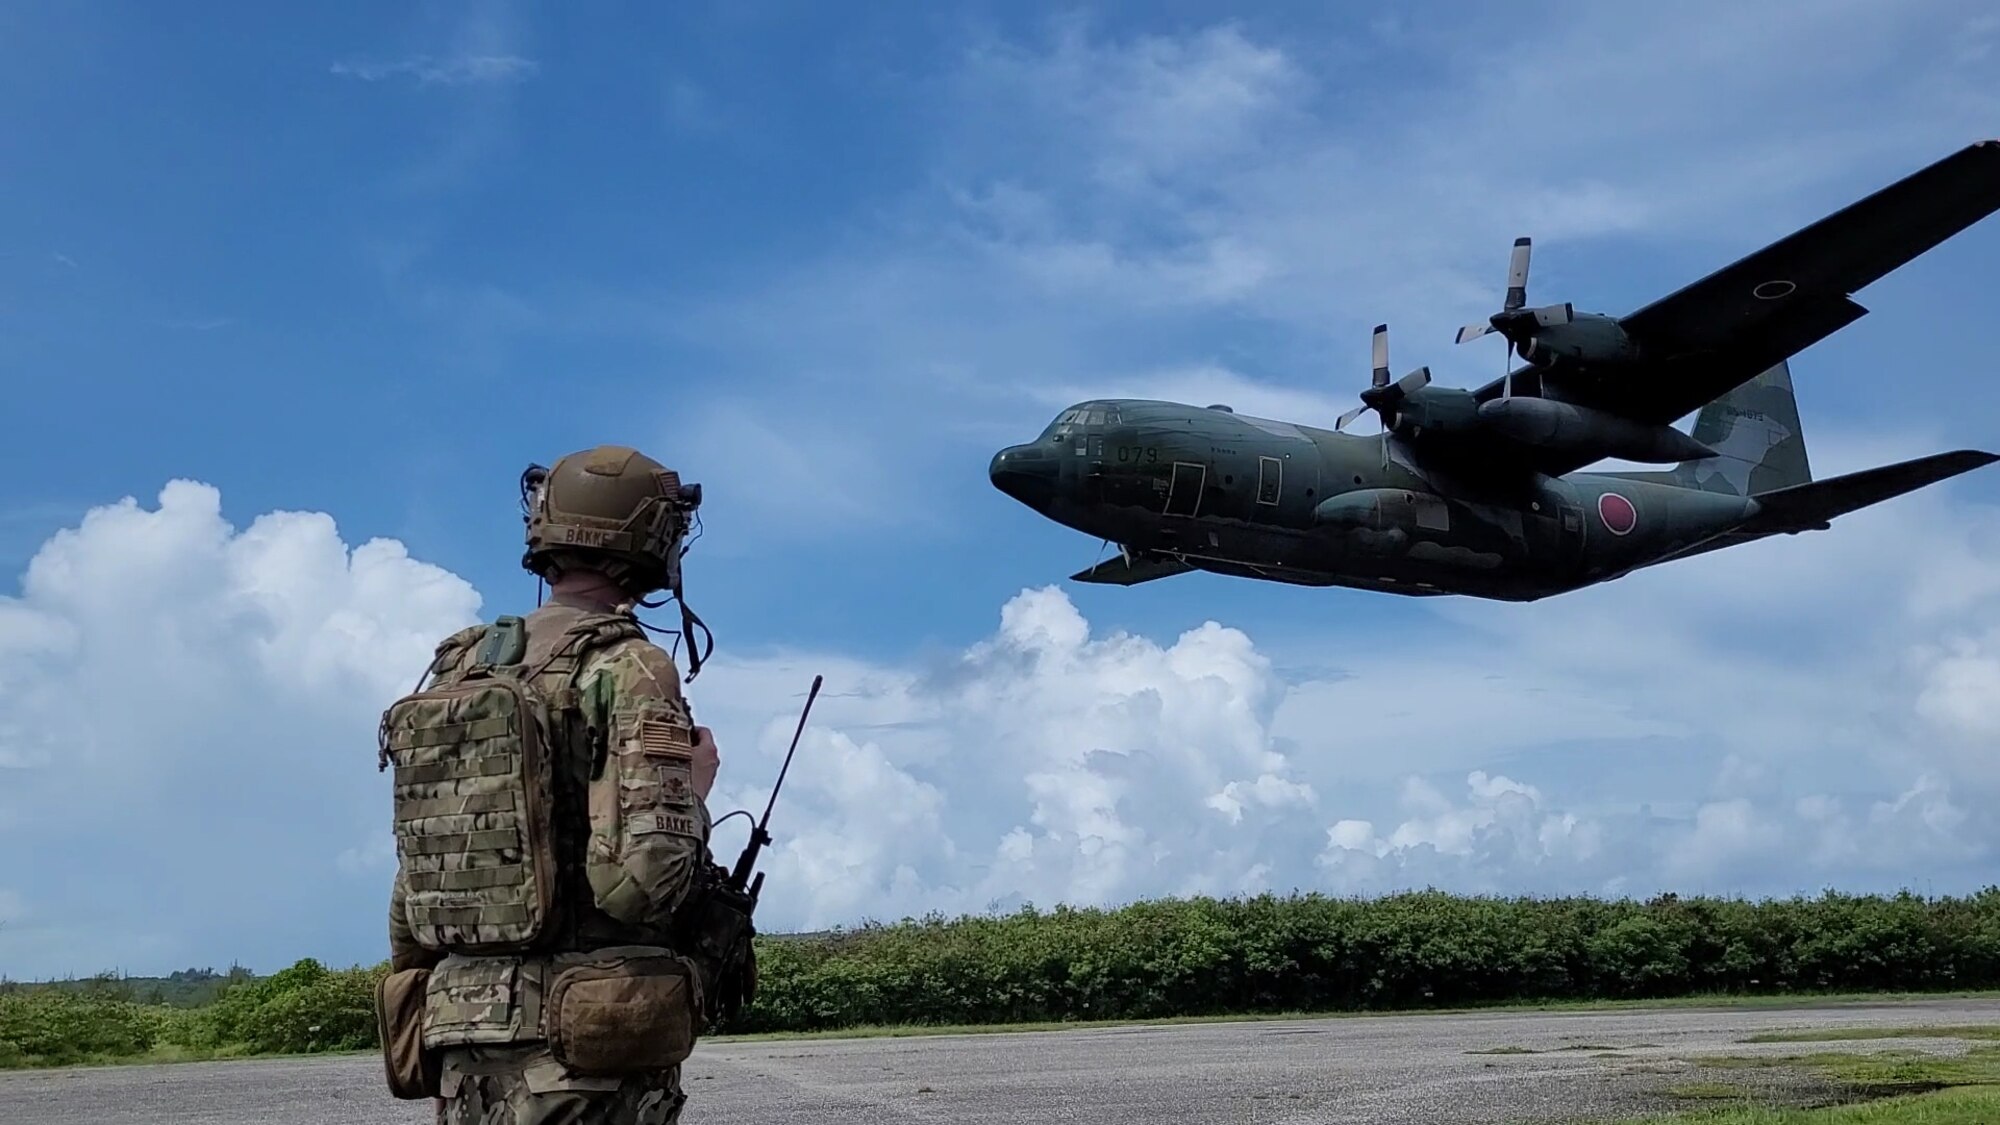 U.S. Air Force Maj. Michael Bakke from the 621st Mobility Support Operations Squadron, Joint Base McGuire-Dix-Lakehurst, New Jersey, prepares as a Japanese C-130 lands on Baker Landing Zone in Tinian, U.S. Commonwealth of the Northern Marianas, July 12, 2023. 621st Mobility Support Operations Squadron members, Air Mobility Liaison Officers, Expeditionary Air Ground Liaison Element members, and Japanese loadmasters participated in Mobility Guardian 23, where their mission was to support the coalition landing zone, drop zone operations, and support cargo preparation. (Courtesy Photo)